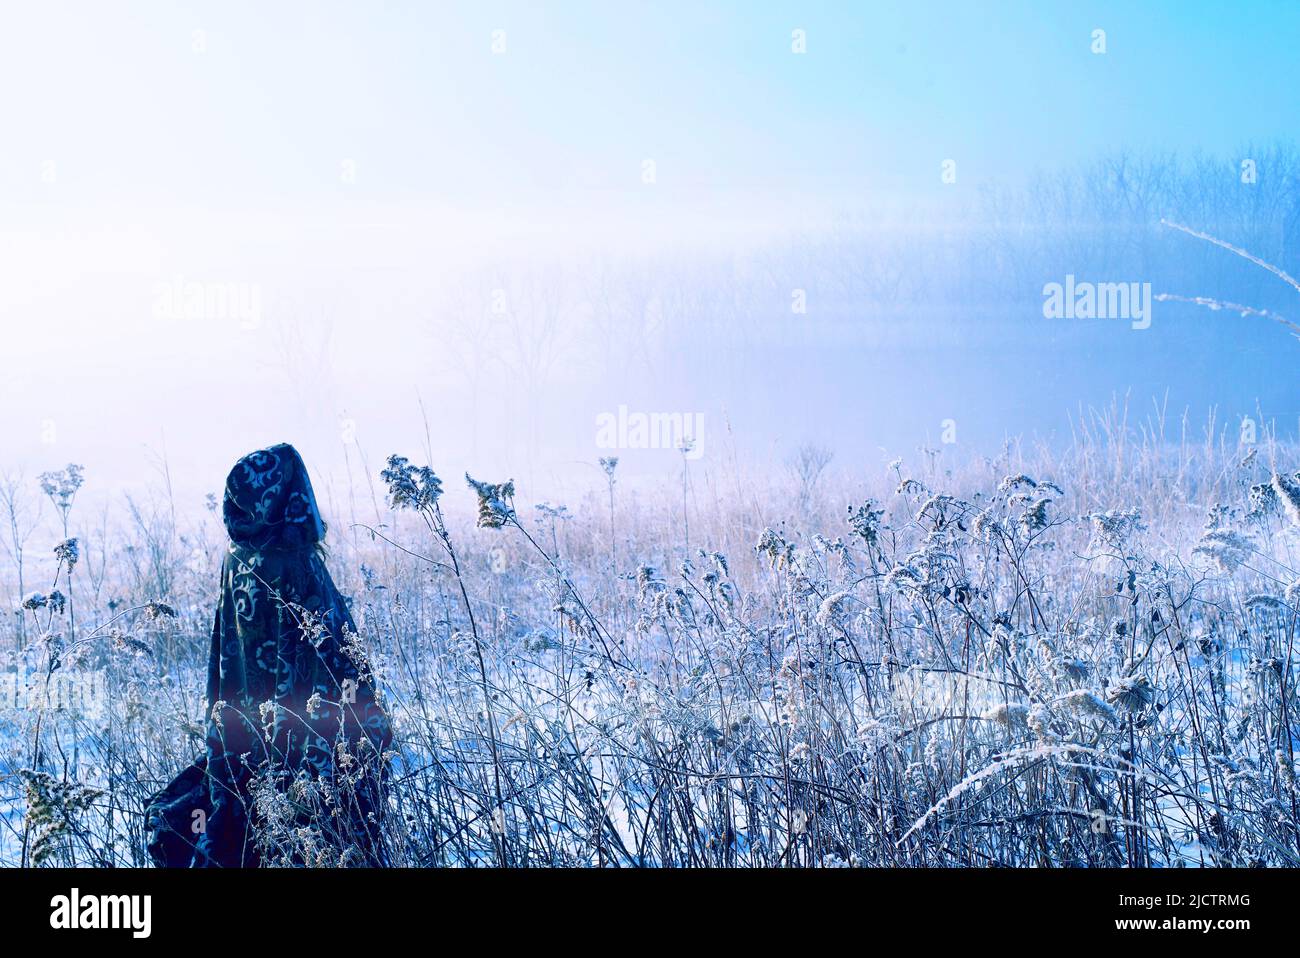 Shaman medieval woman in snowy marsh greeting the misty morning. Stock Photo